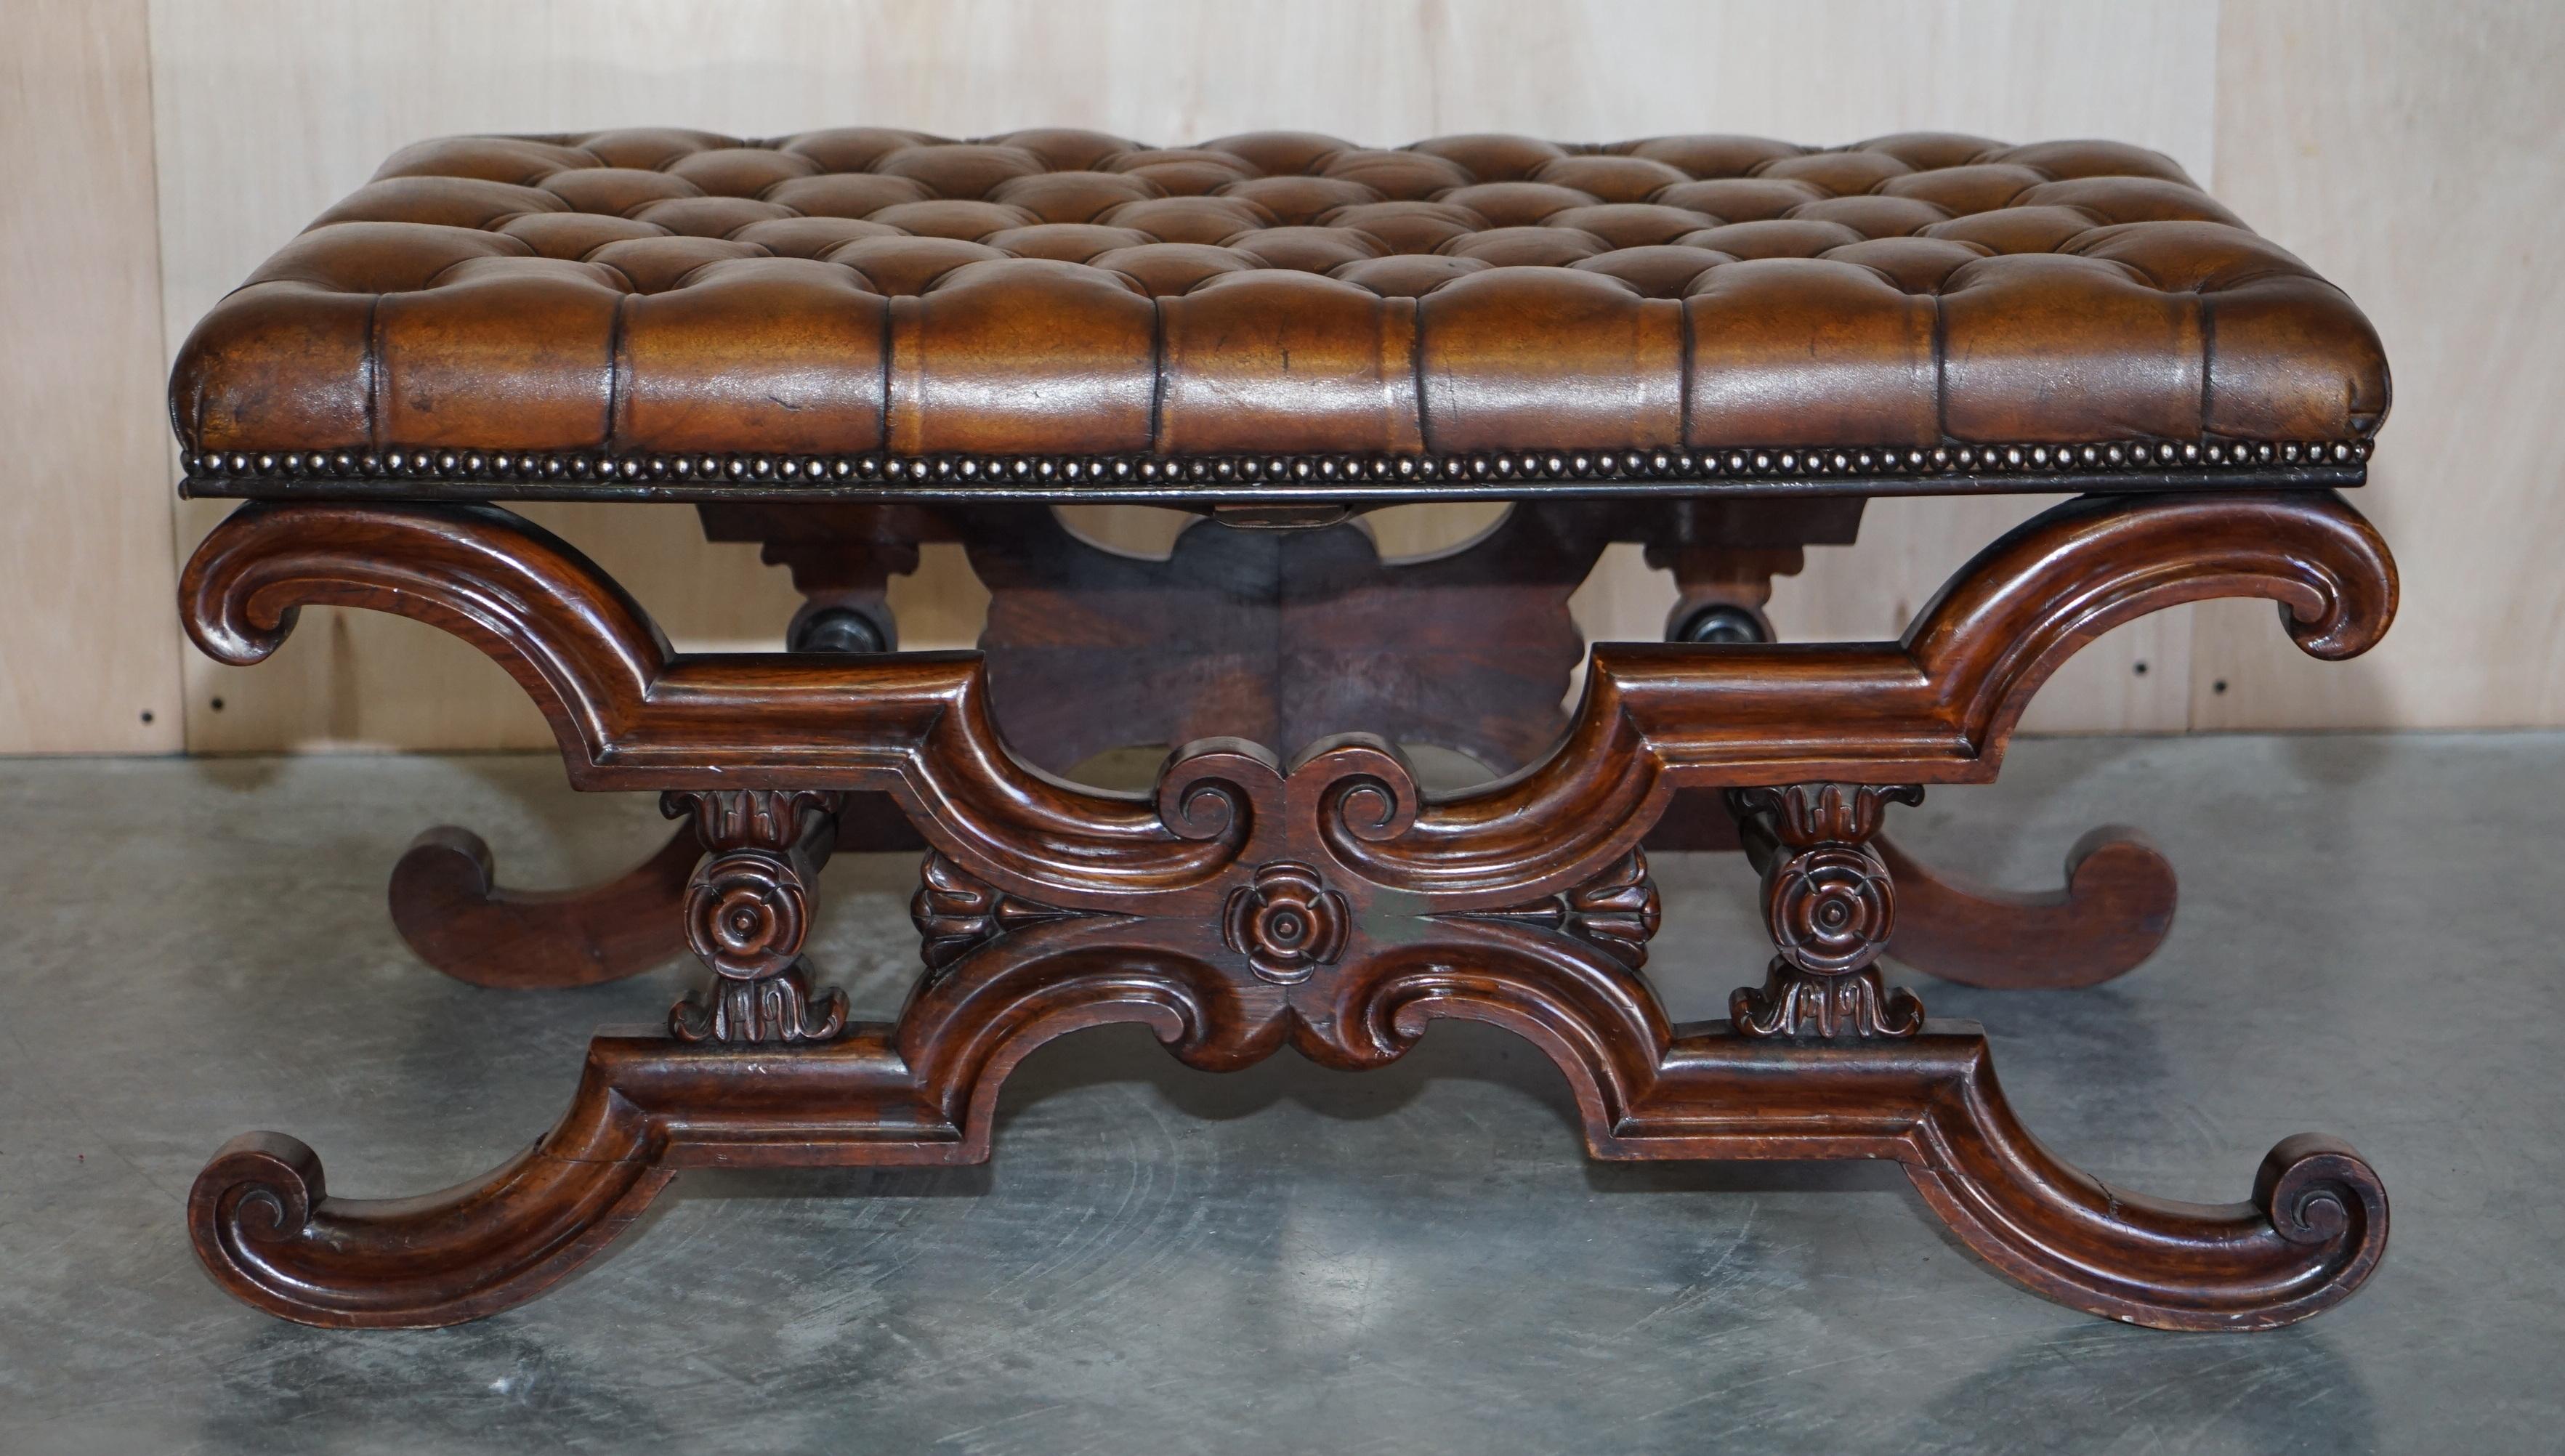 We are delighted to offer for sale this stunning original William IV circa 1830 solid Rosewood hand dyed brown leather bench stool.

An absolutely stunning find, much larger than it looks, this is big enough to be a small coffee table stool or to